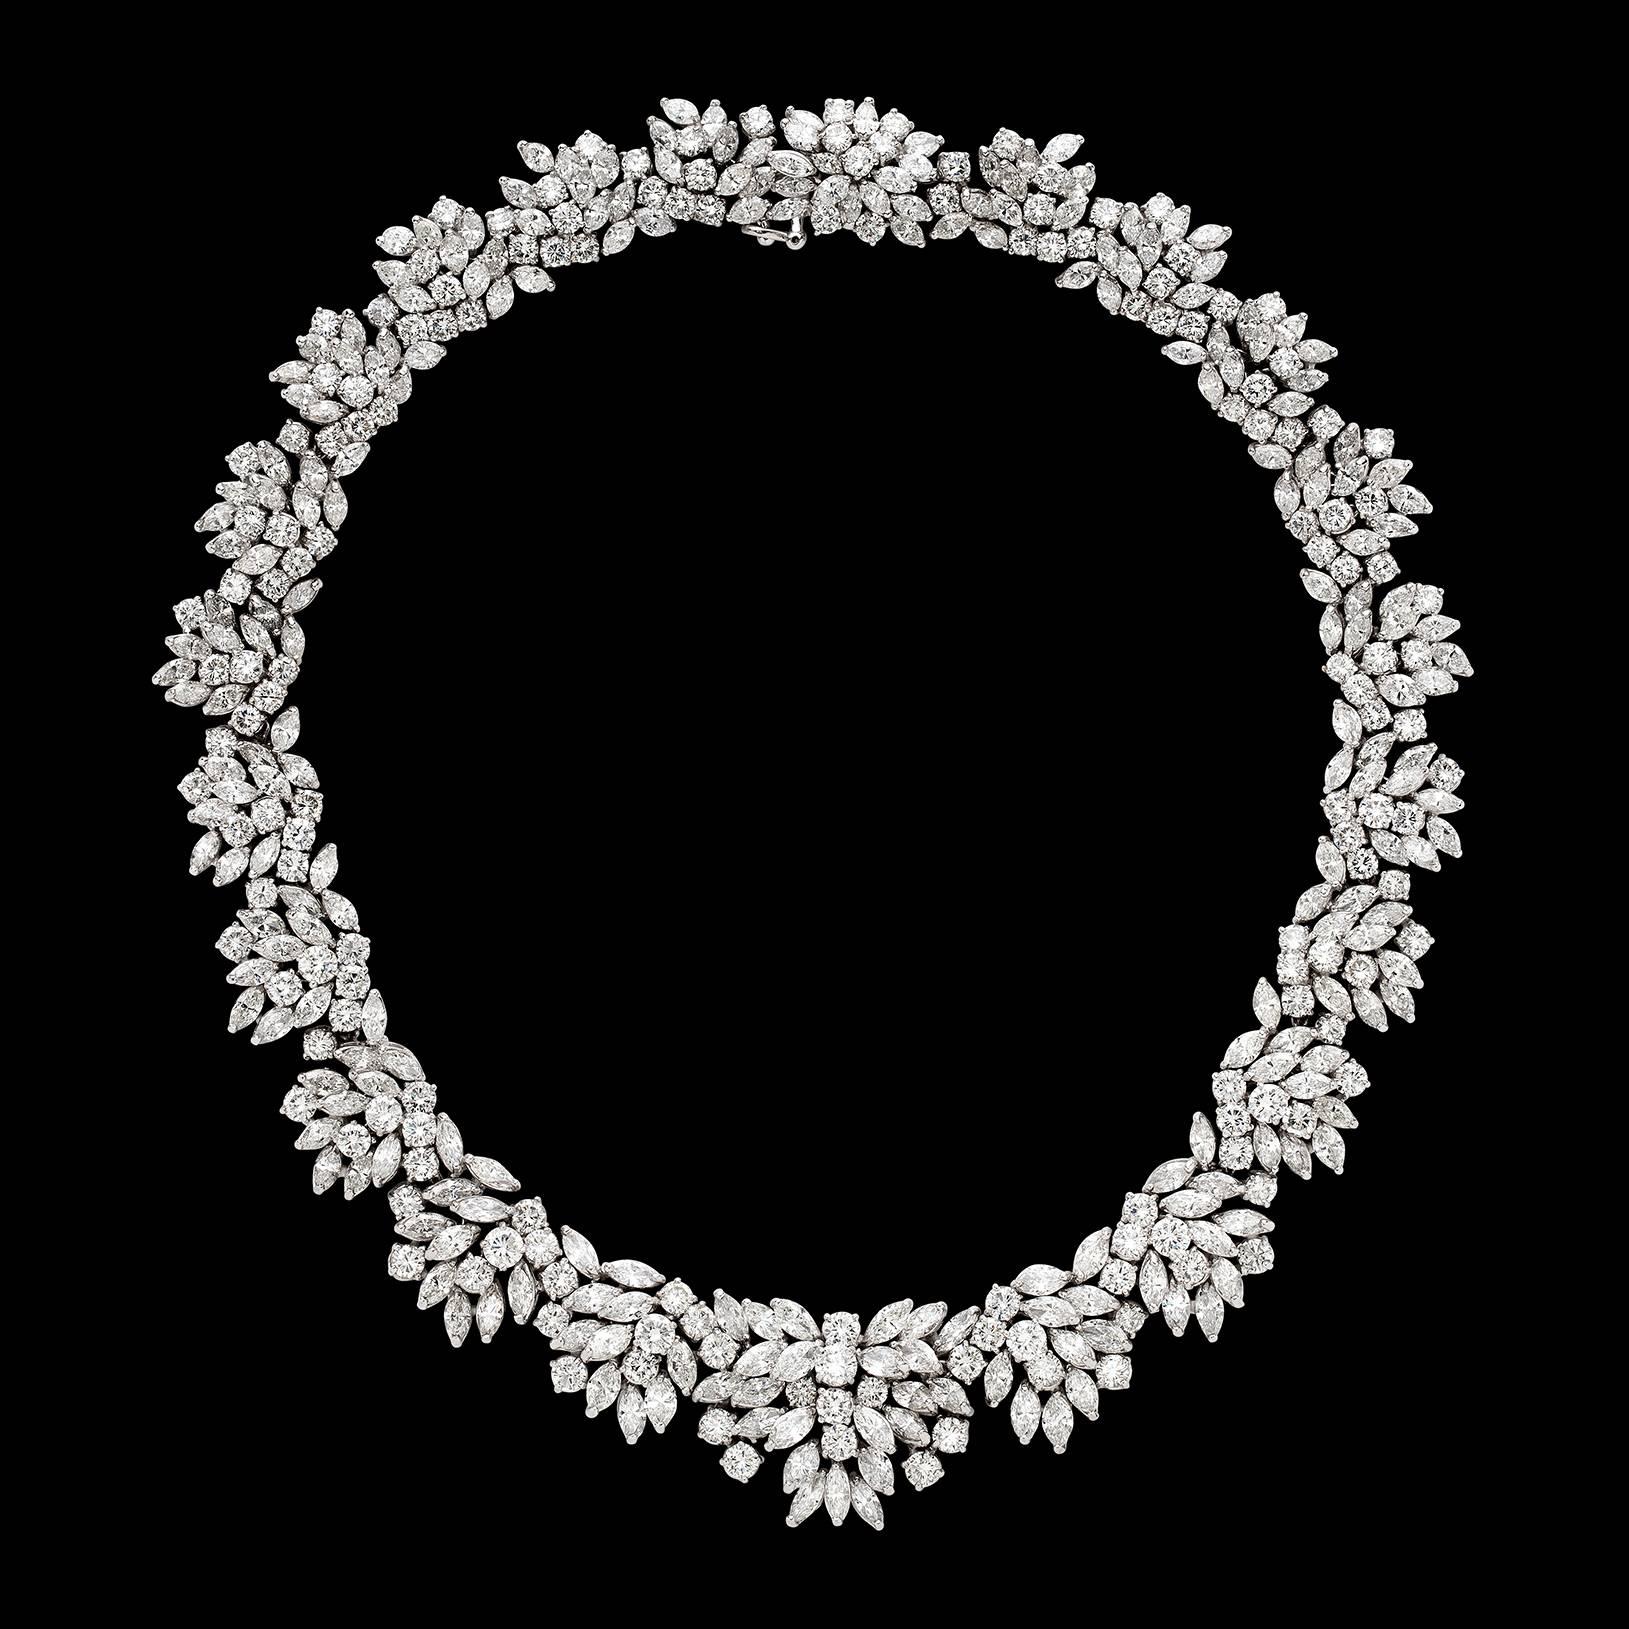 This exquisite platinum tapering cluster design necklace is set throughout with 407 marquise and round brilliant-cut diamonds, weighing in total an estimated 106.00 carats. The necklace measures 17 3/4 inches in length, and weighs 148.8 grams. A